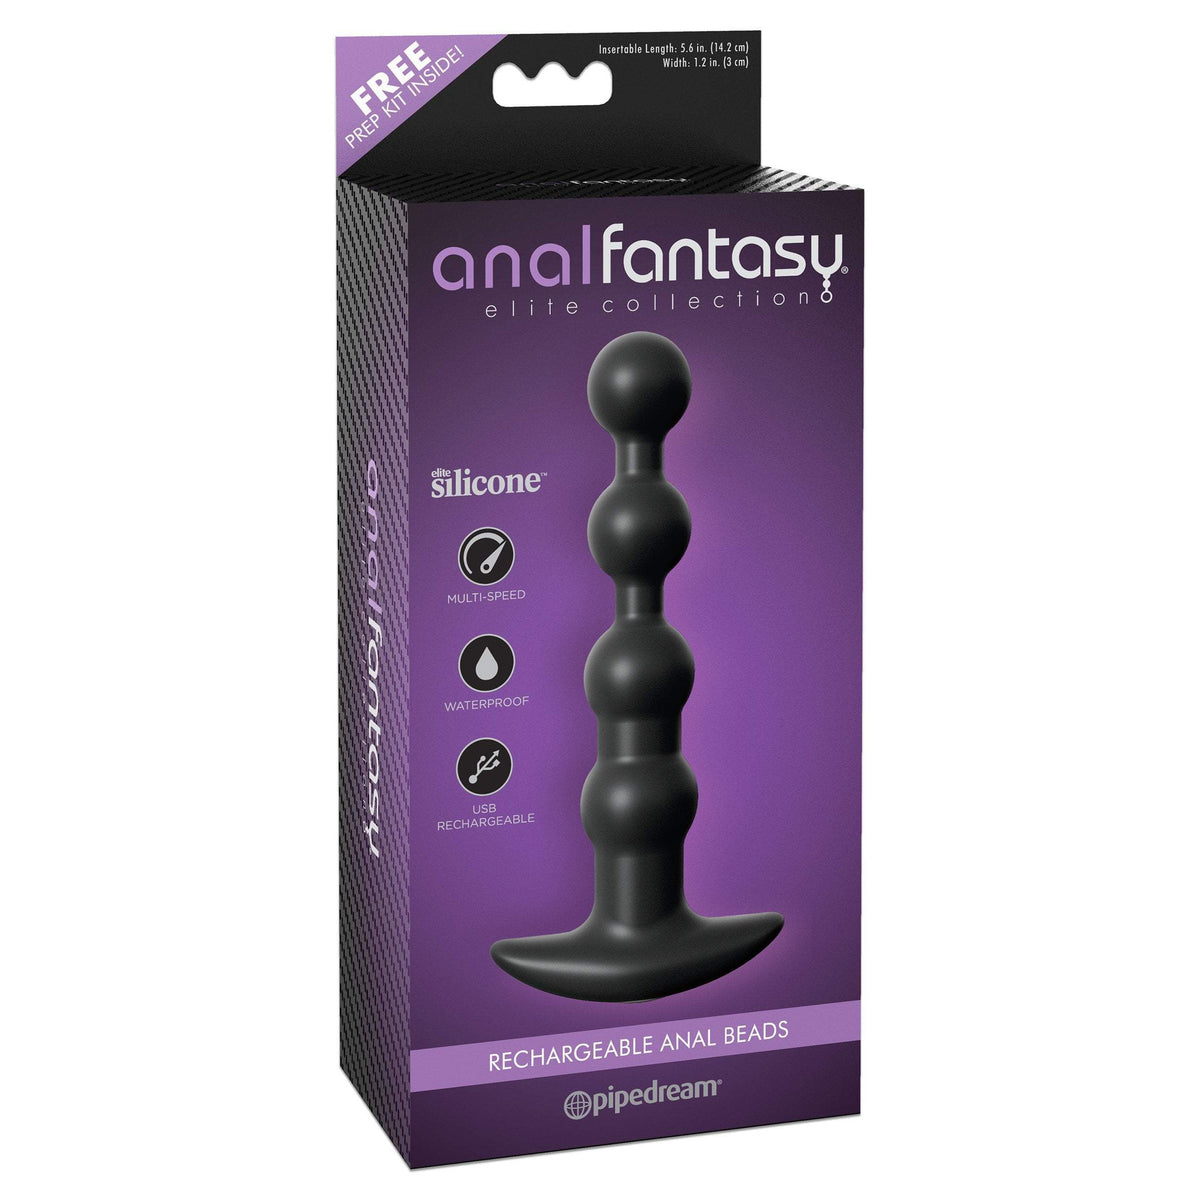 Pipedream - Anal Fantasy Elite Collection Rechargeable Anal Beads (Black) -  Anal Beads (Vibration) Rechargeable  Durio.sg